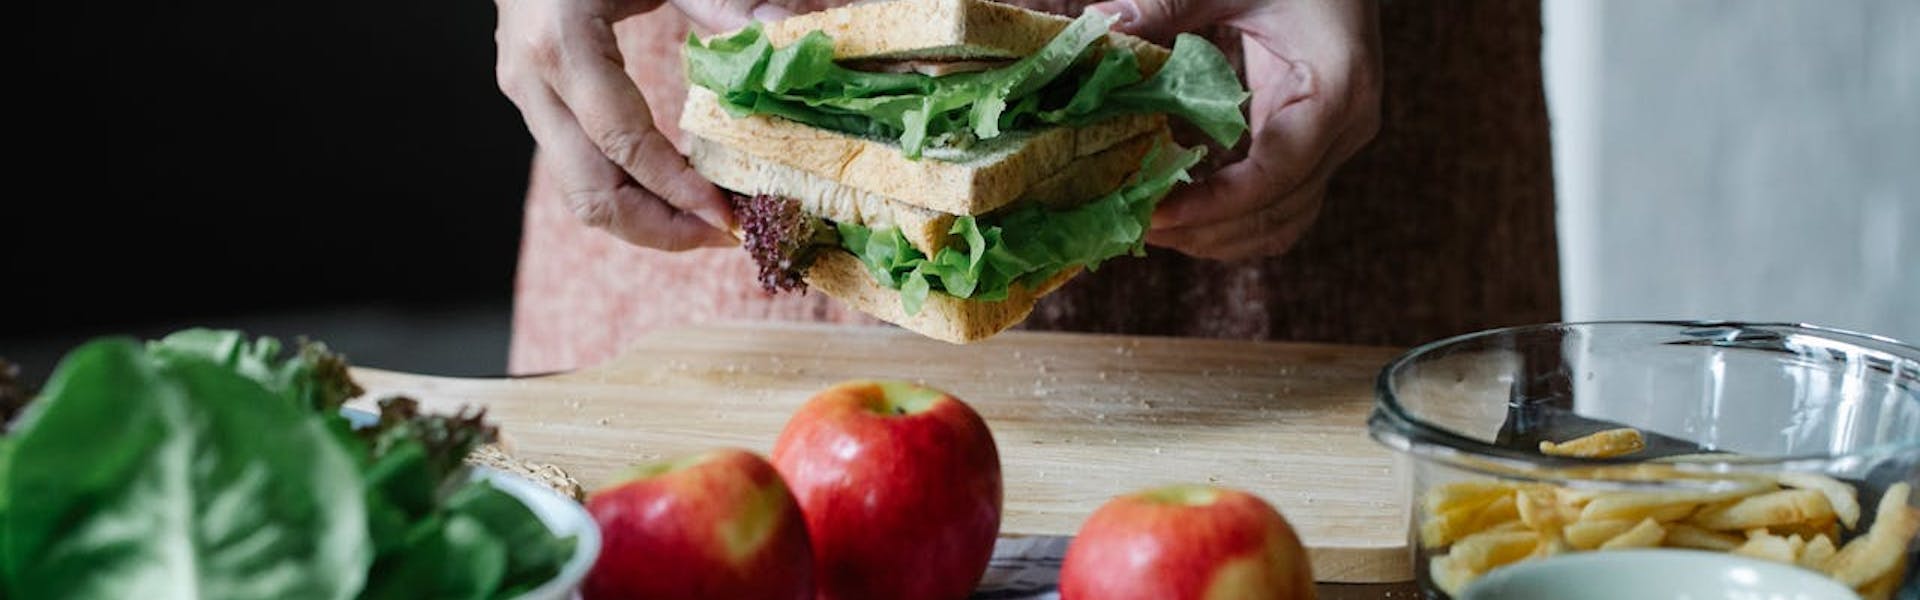 Everything You Ever Wanted to Know about Sandwiches (But Were Too Afraid to Ask)